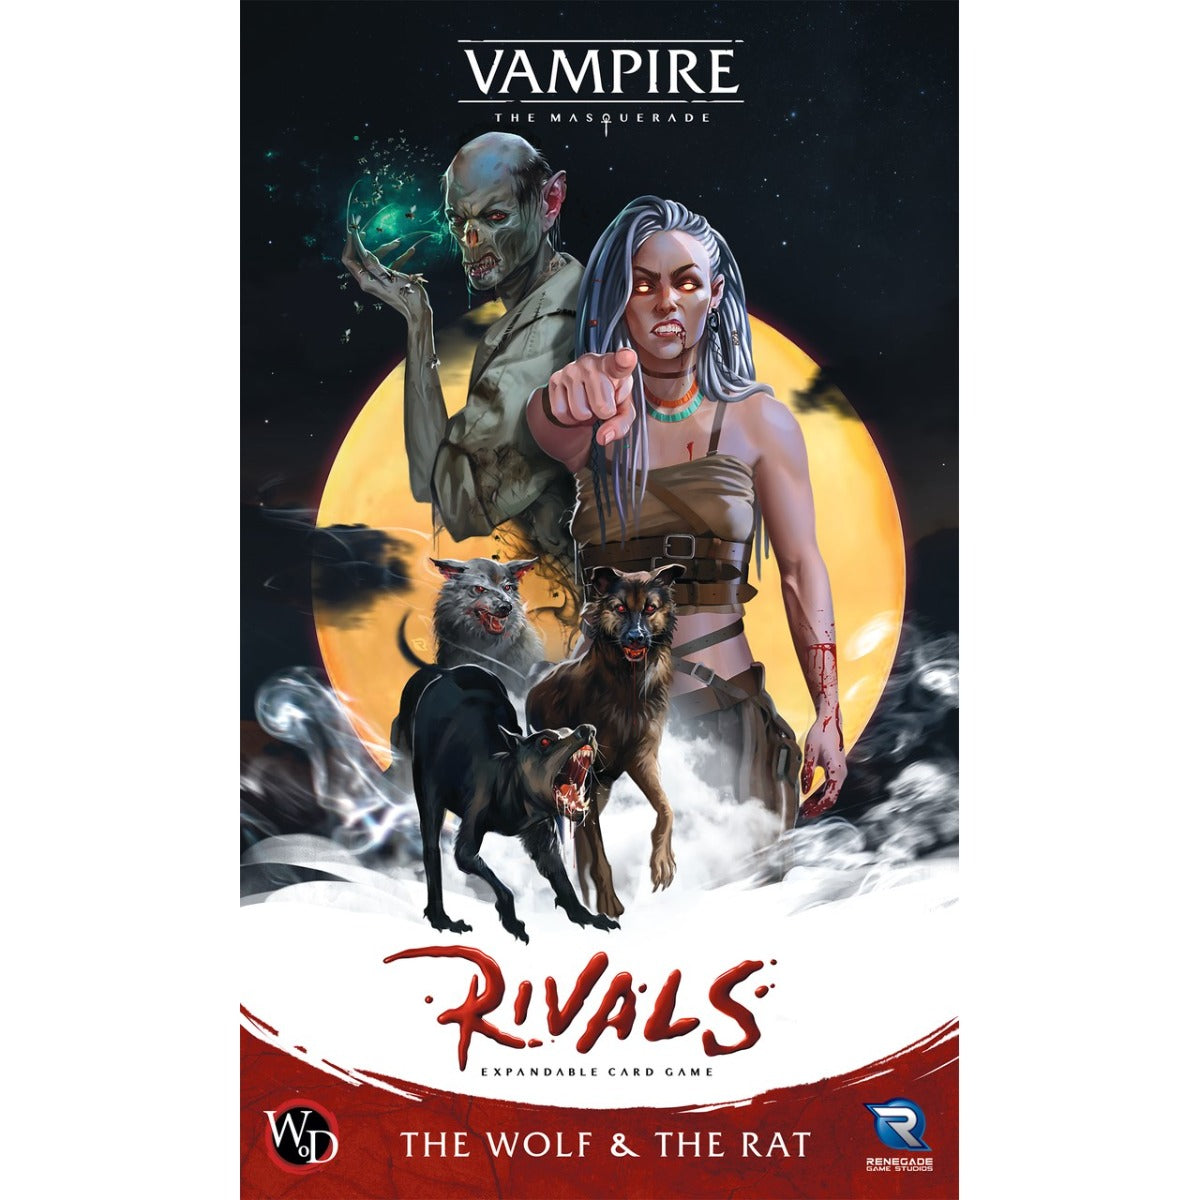 Vampire: The Masquerade Rivals Expandable Card Game - The Wolf & The Rat Expansion